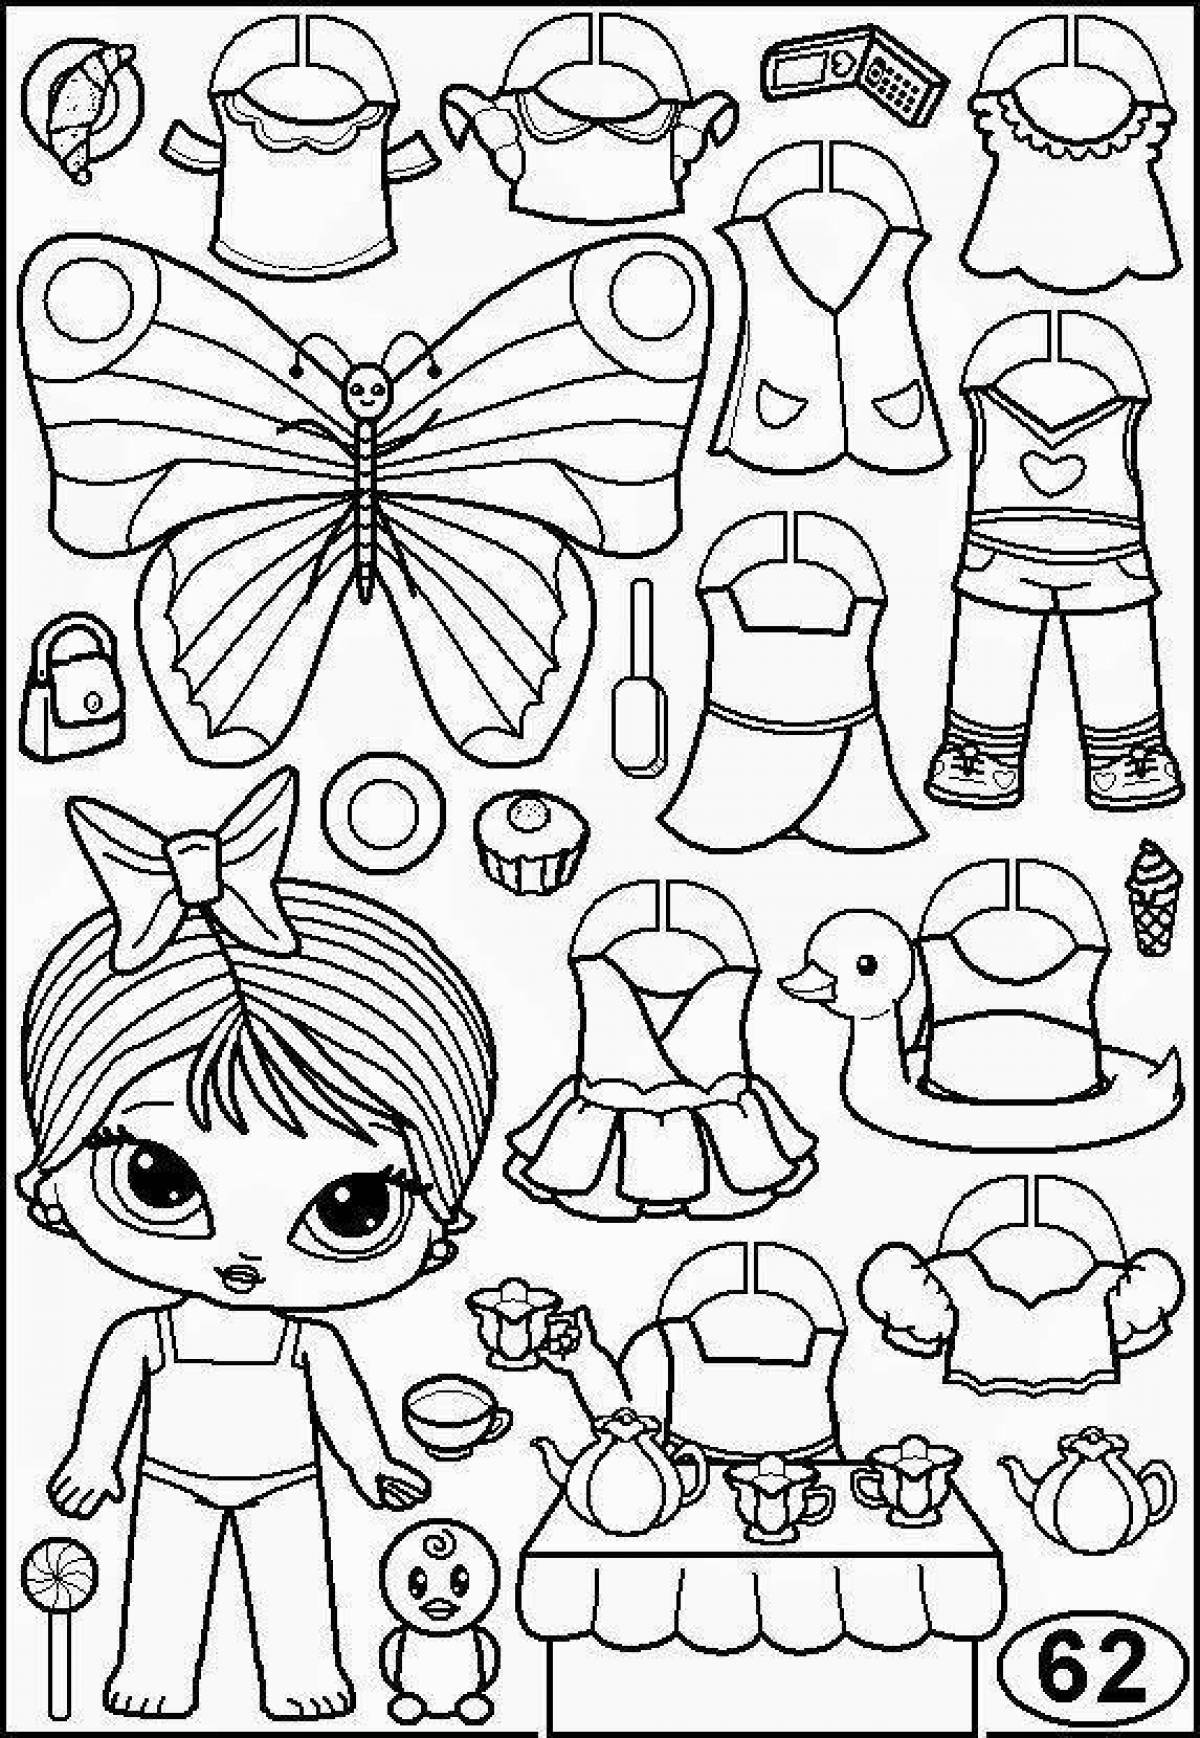 Awesome lol coloring book with clothes